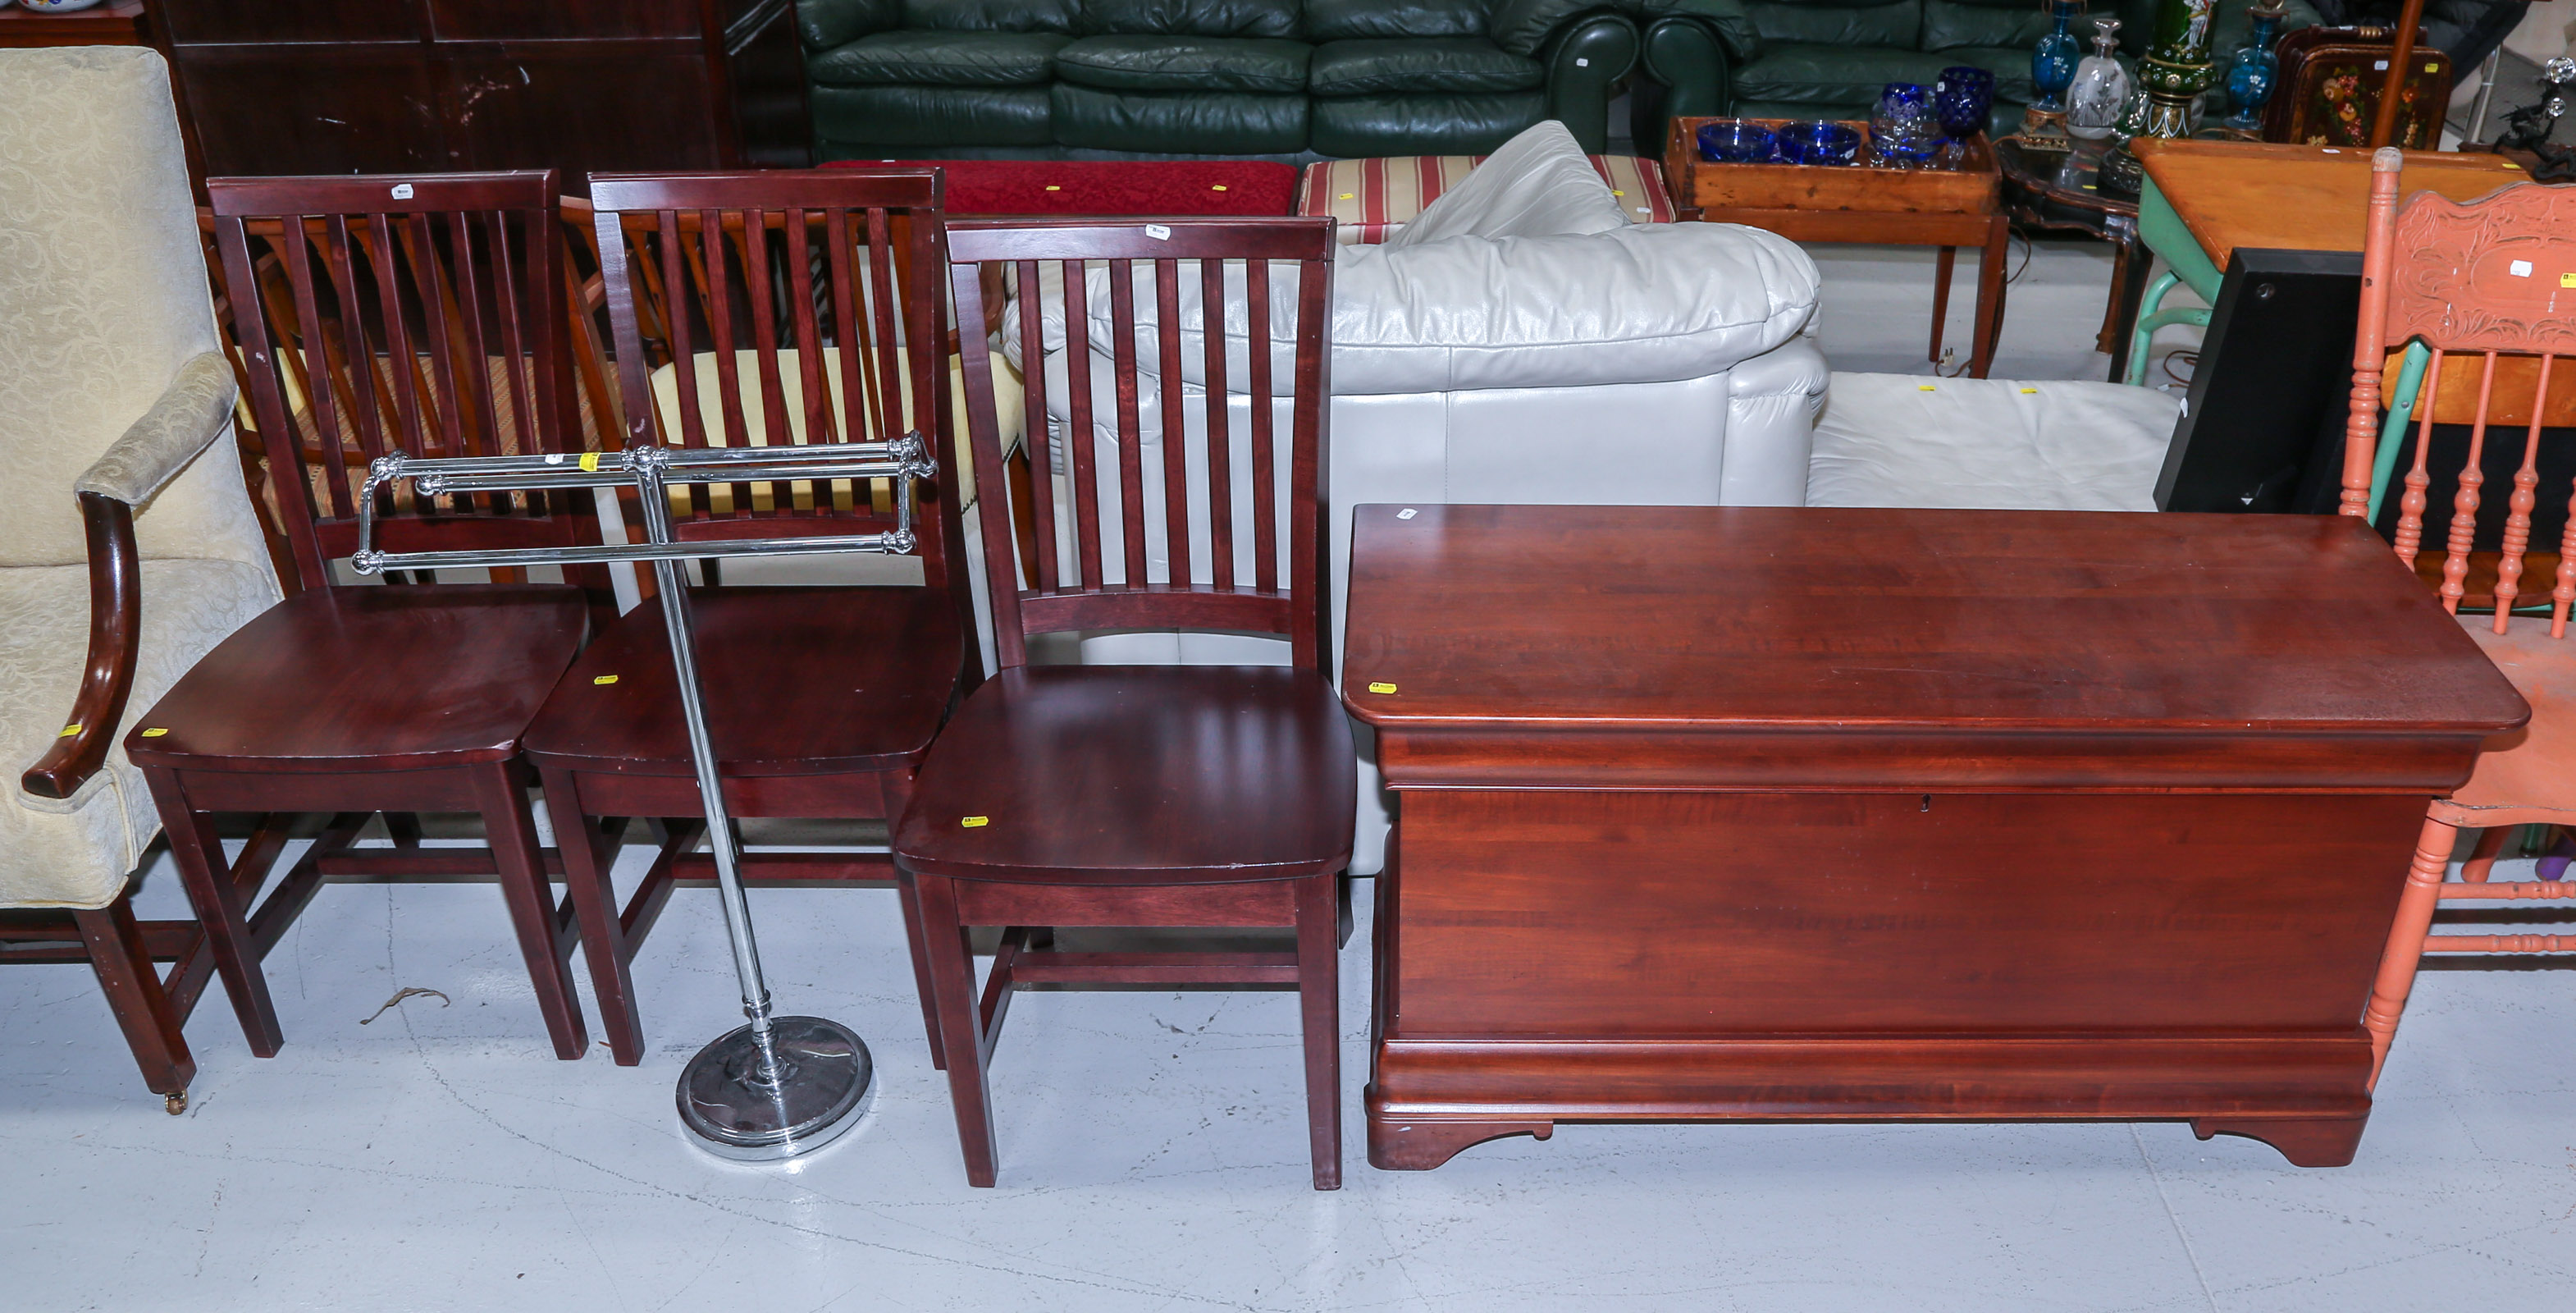 A SELECTION OF FURNITURE Including 3cb763